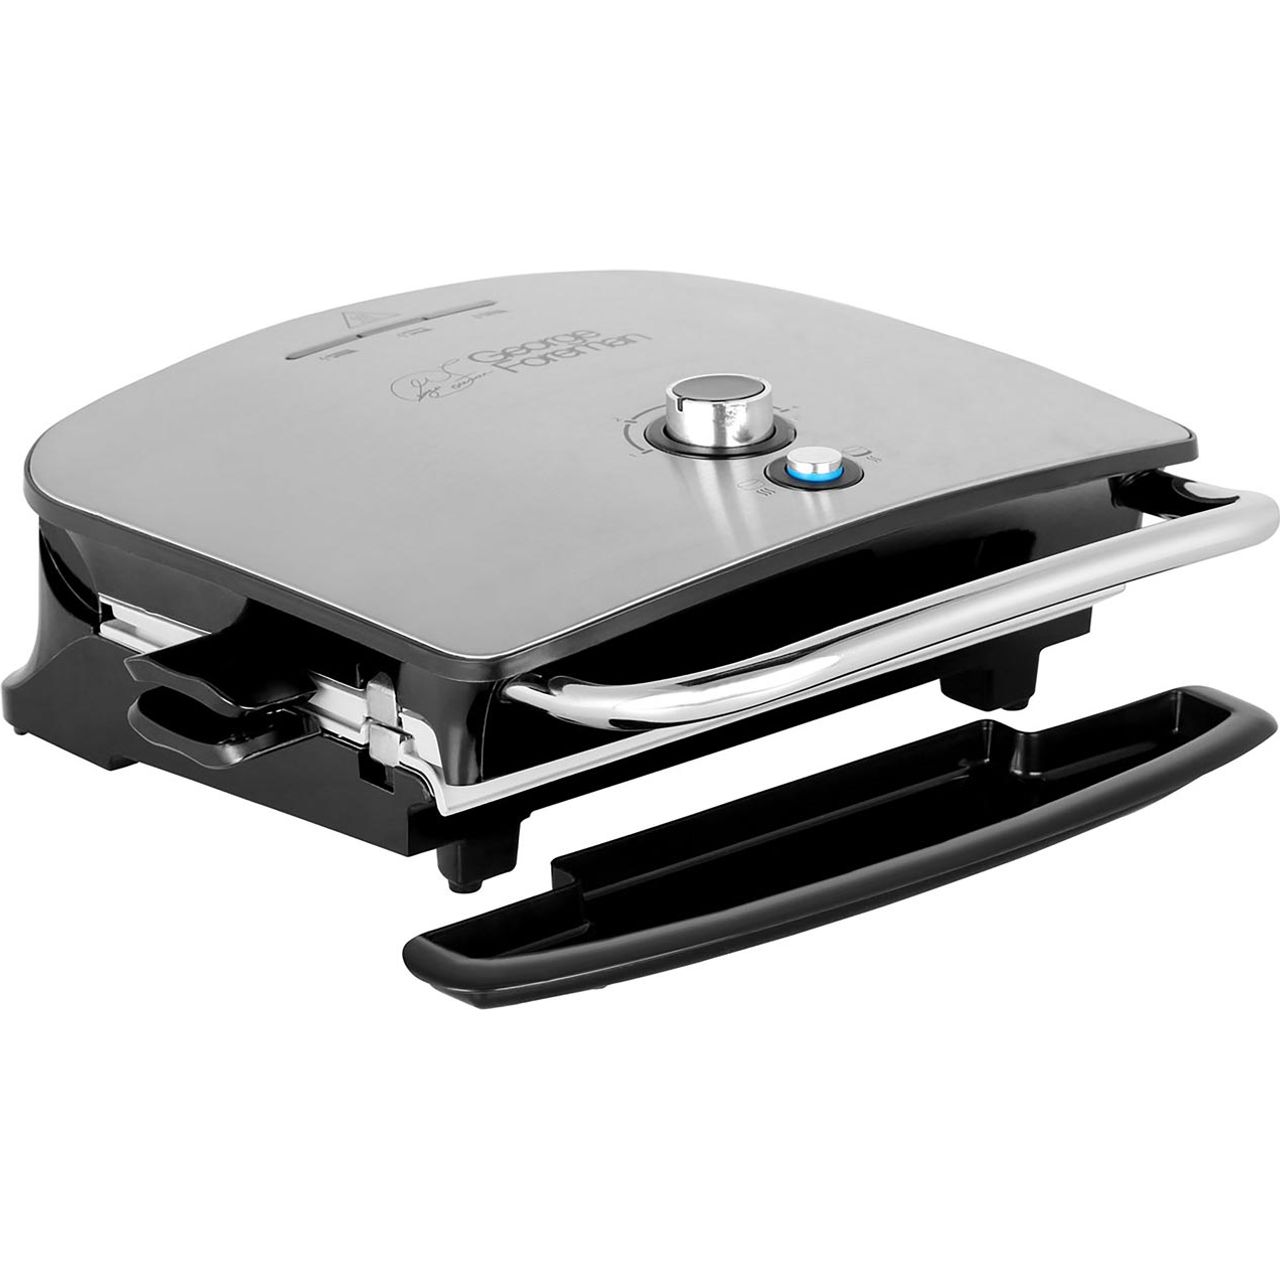 George Foreman Grill & Melt Advanced 22160 Health Grill Review